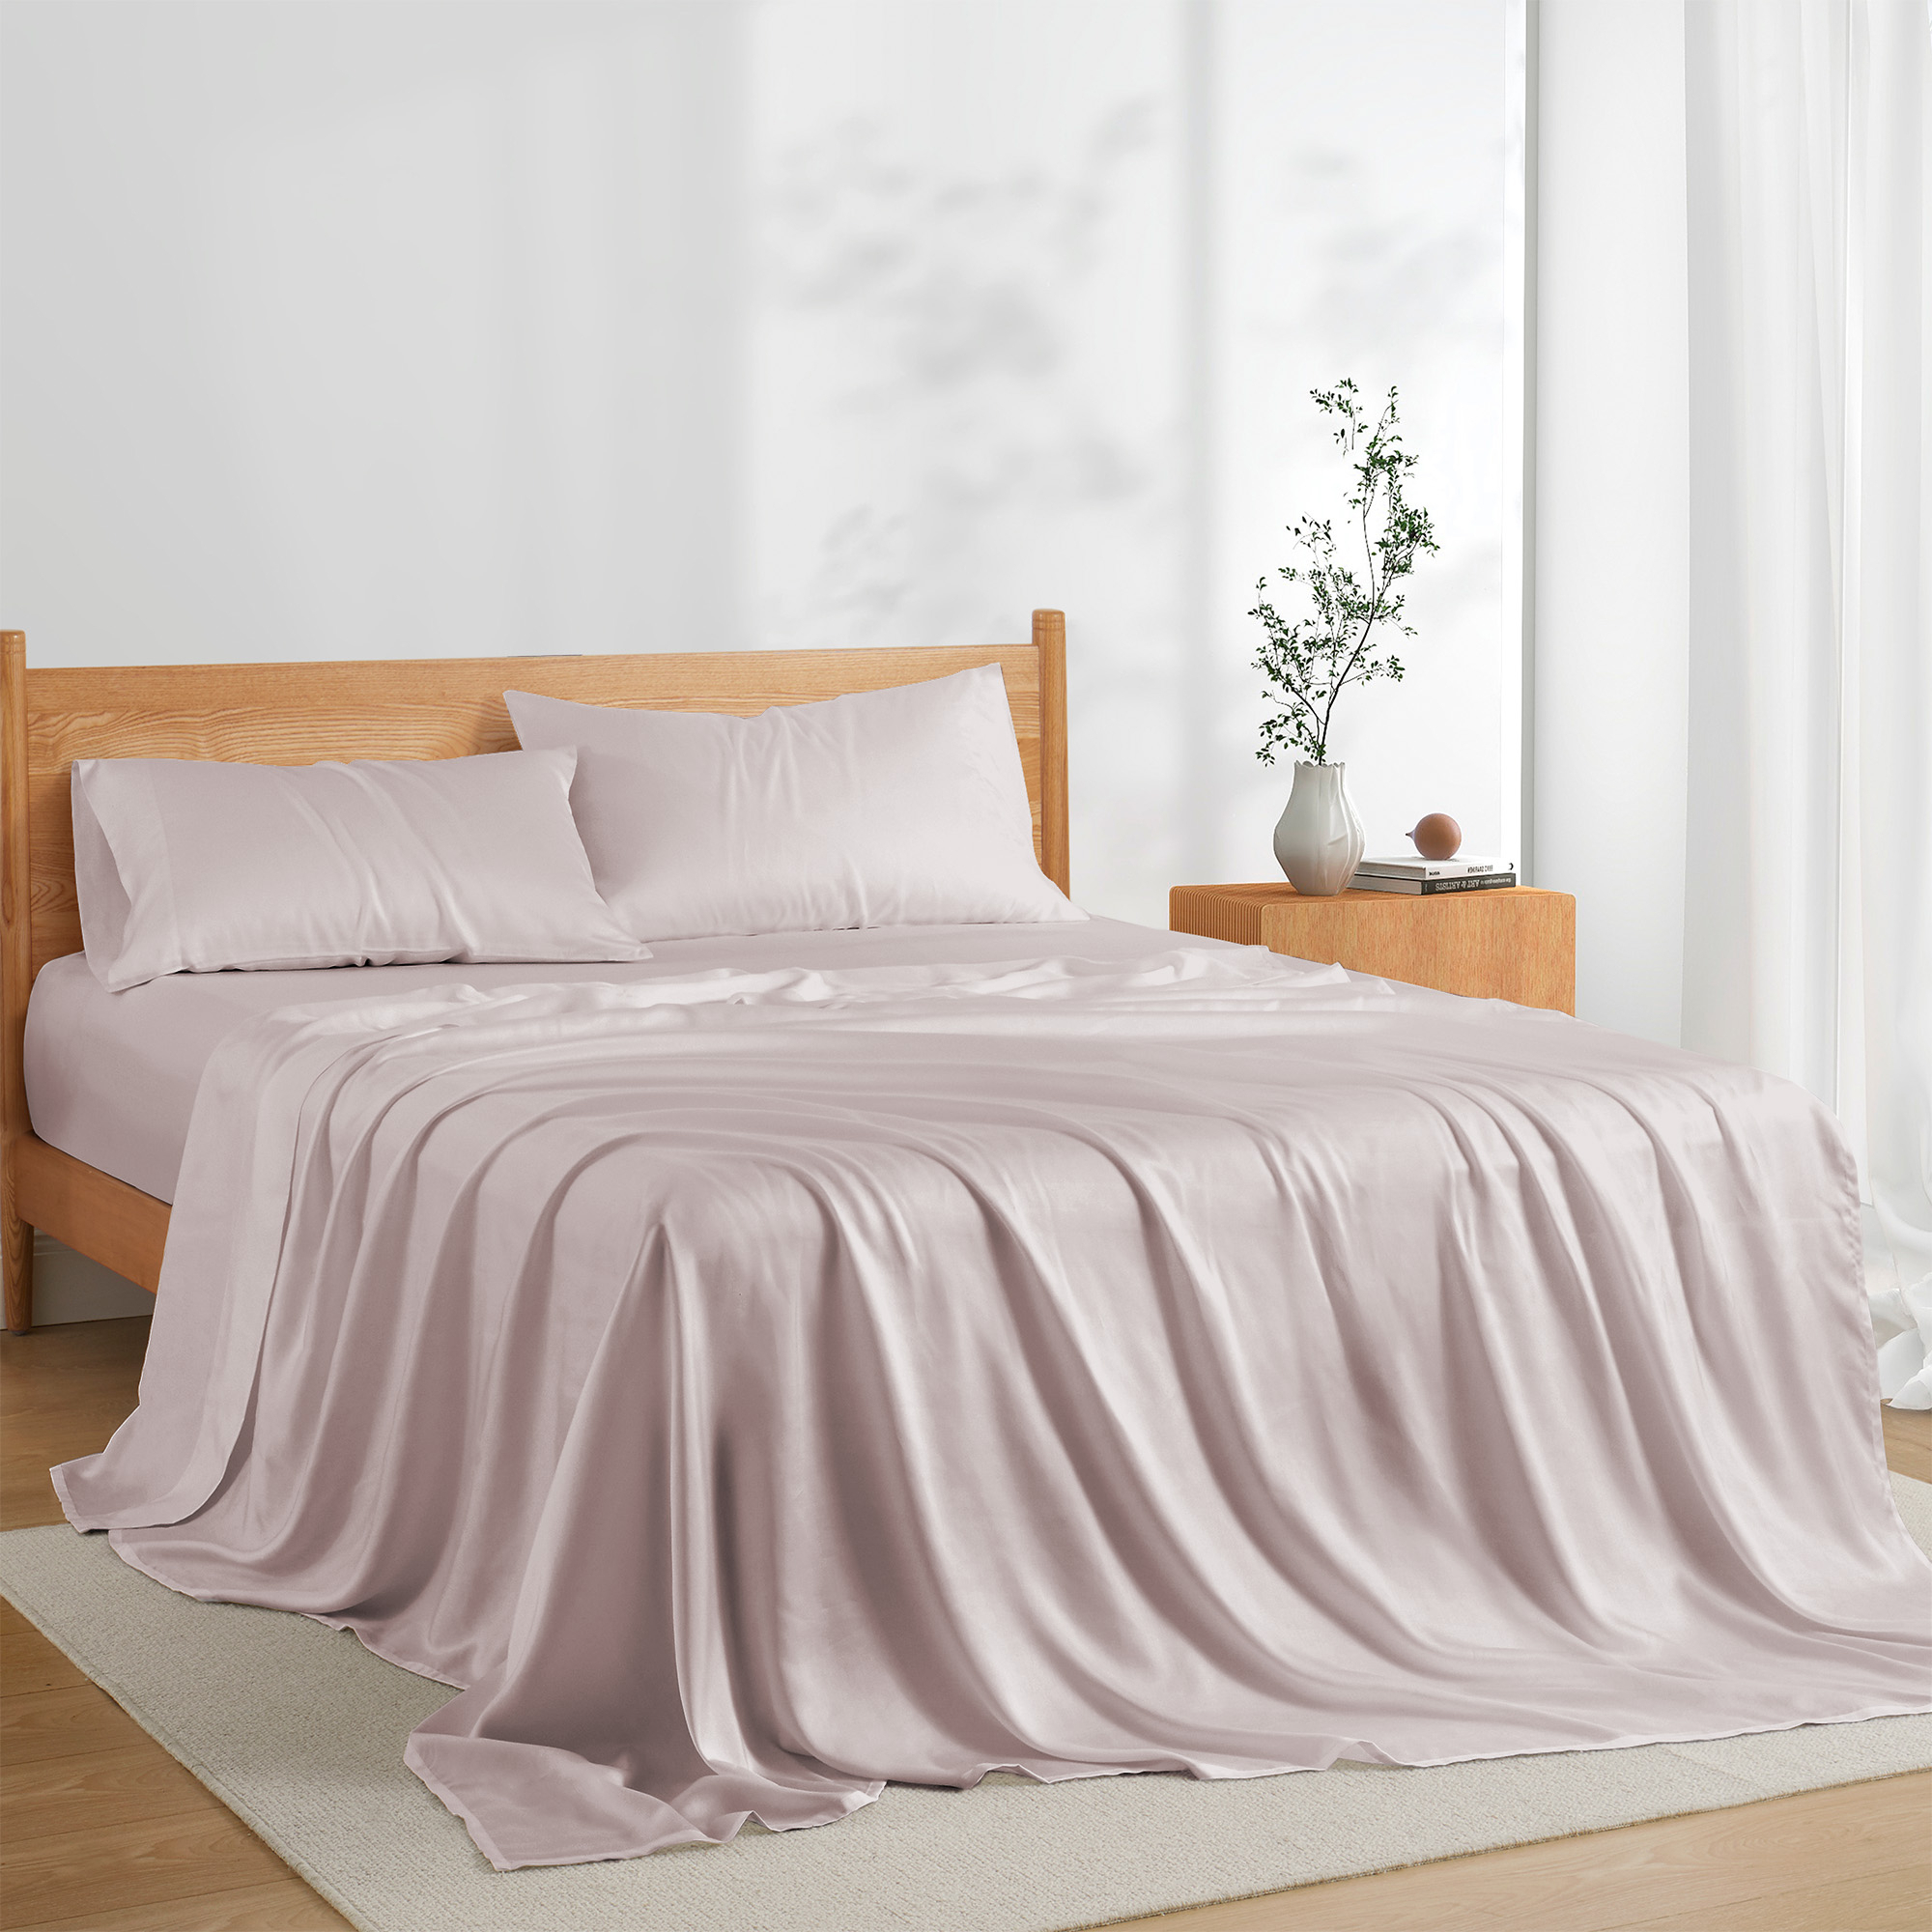 Tencel Lyocell Bed Sheets Silky Soft & Smooth Breathable Sheets, Luxury Hotel Bedding - King Size